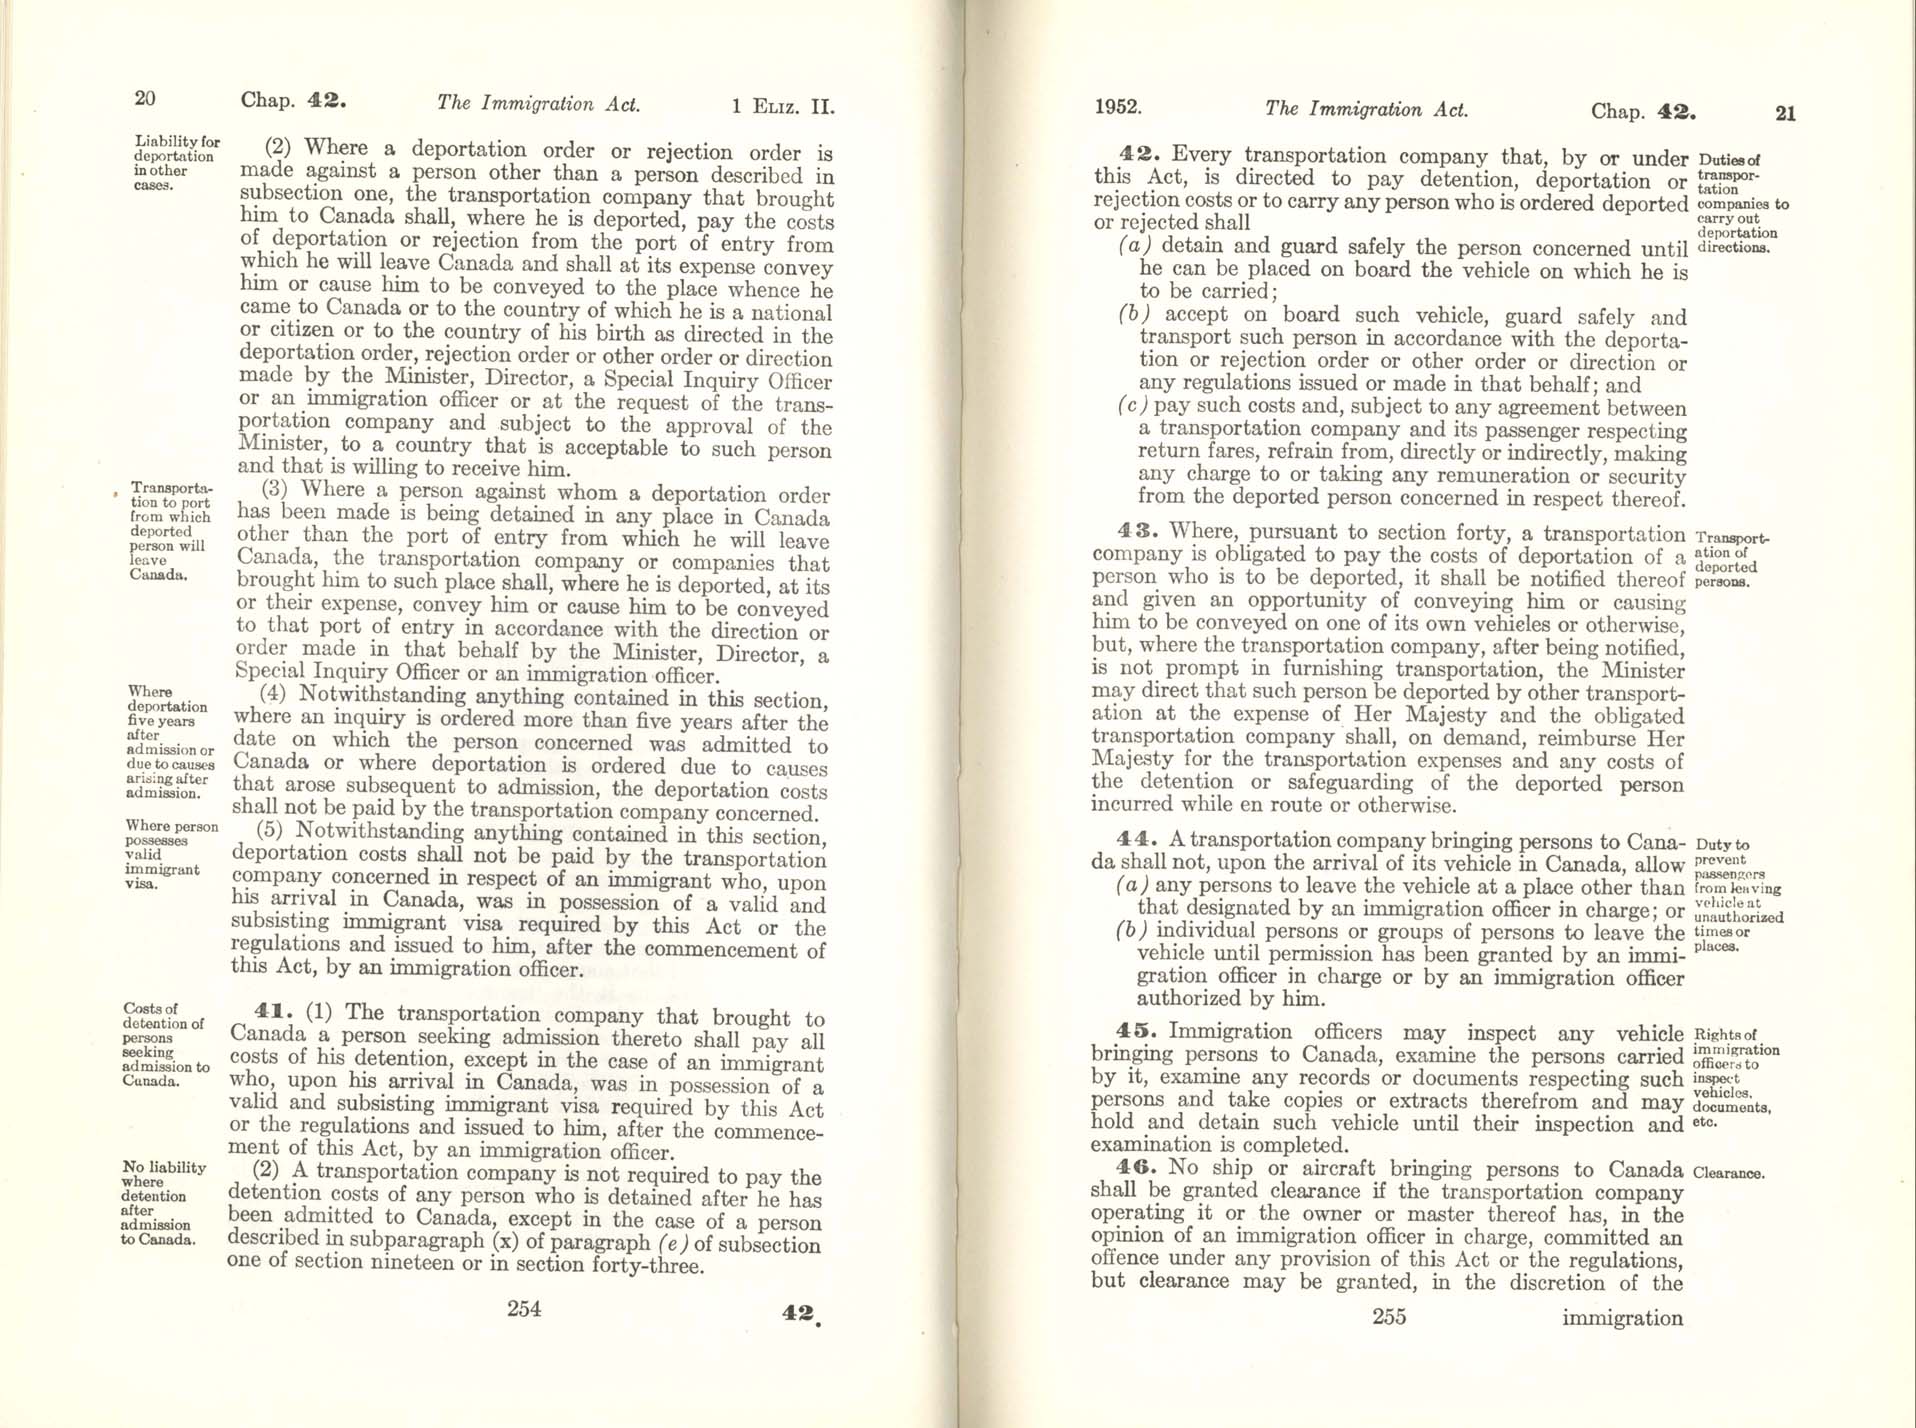 CHAP 42 Page 254, 255 Immigration Act, 1952